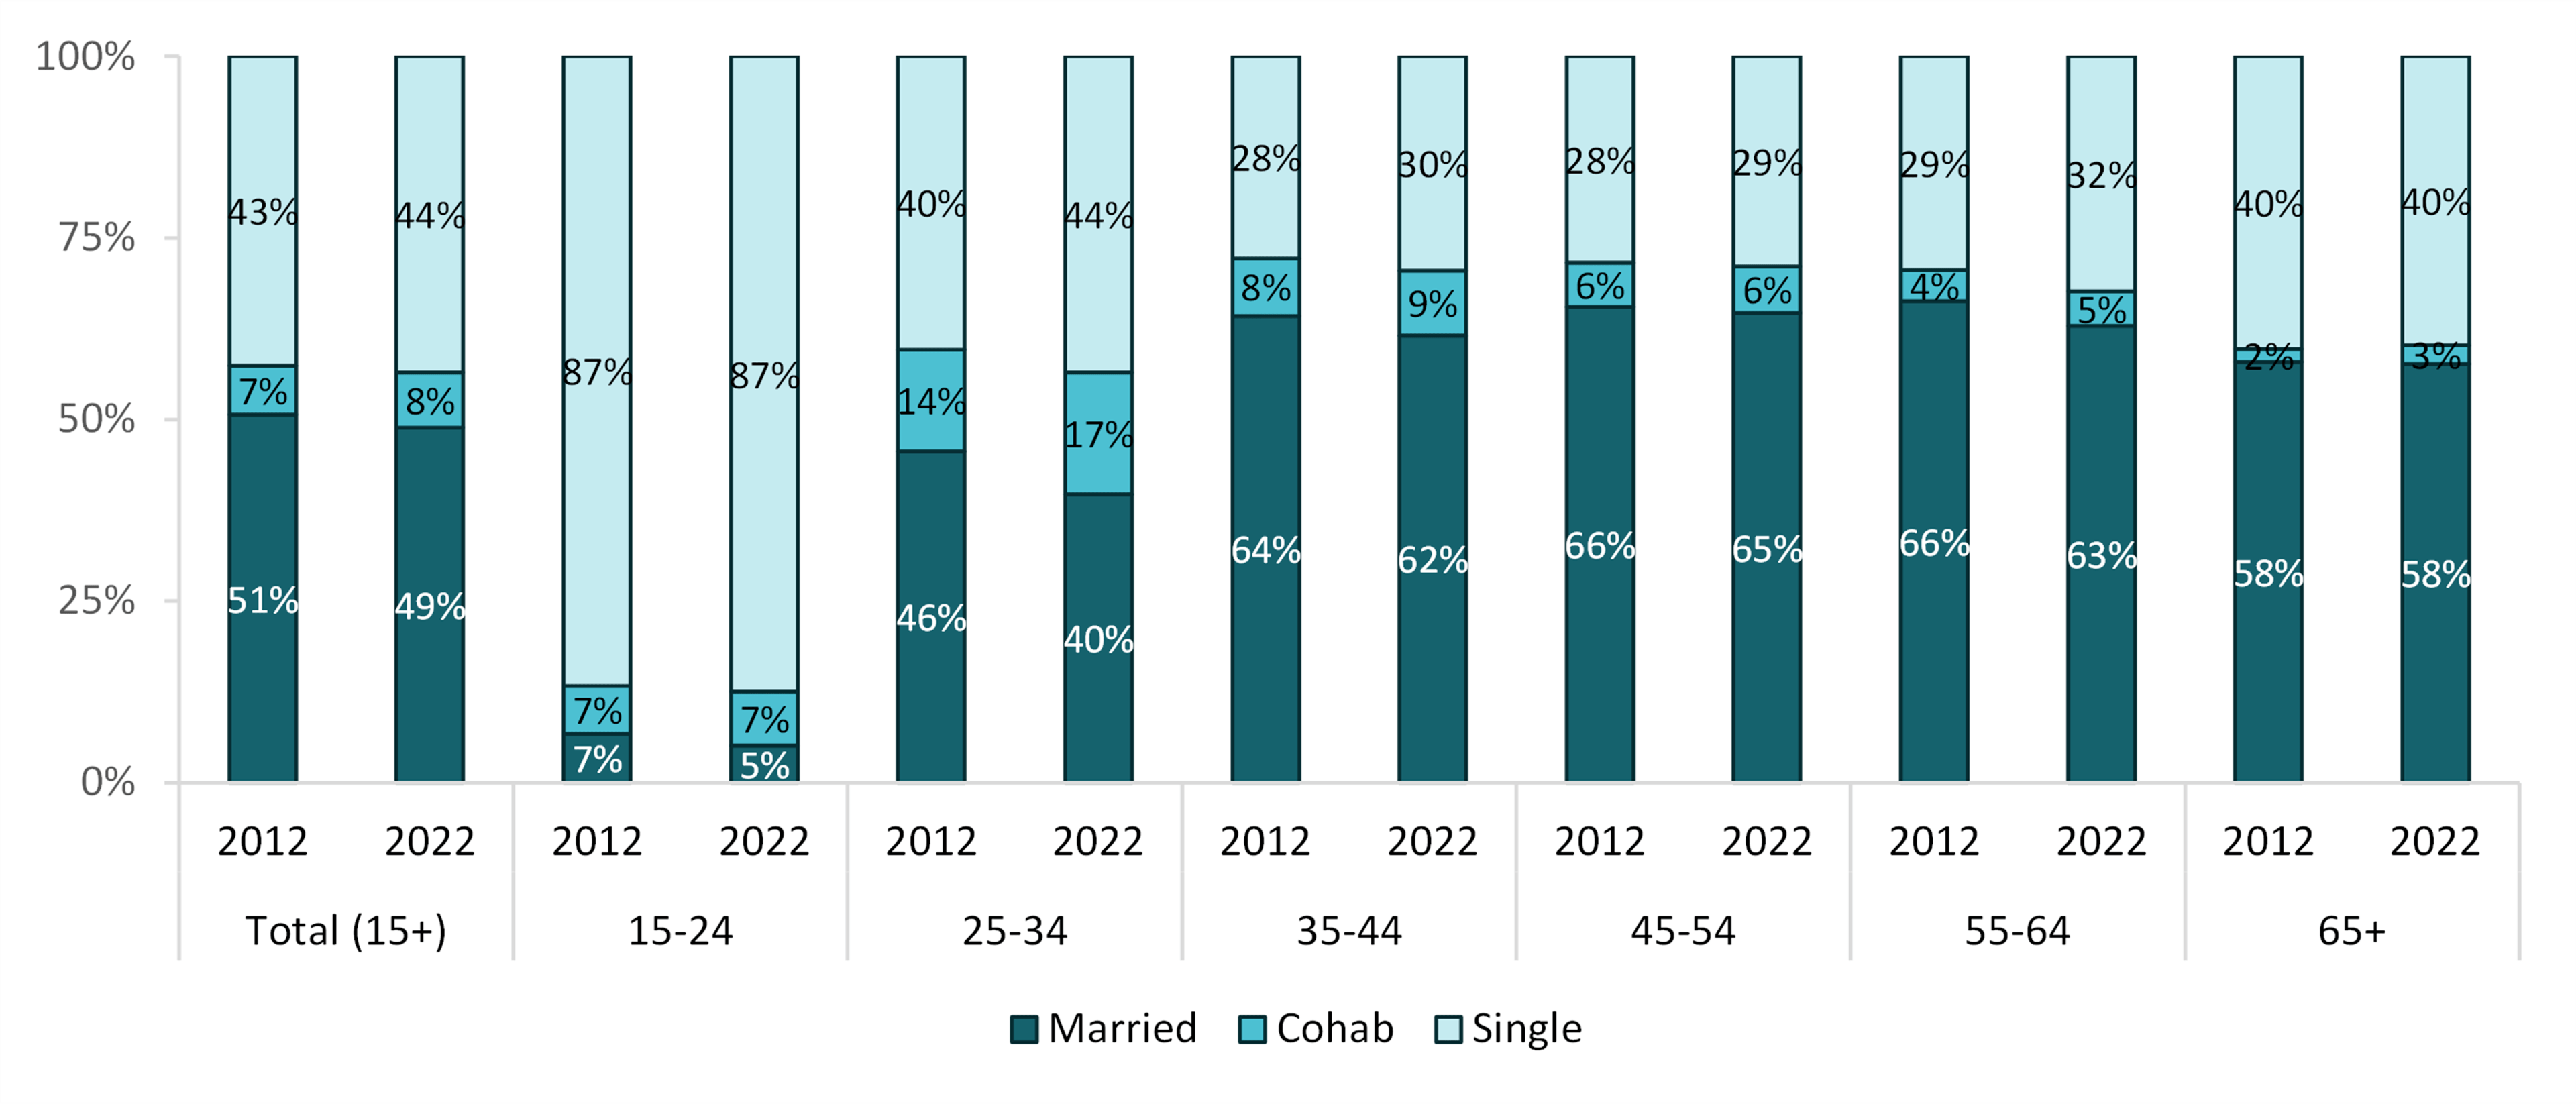 graph showing Figure 1. Shares of Single, Cohabiting, and Married Individuals in the U.S. by Age, 2012 & 2022